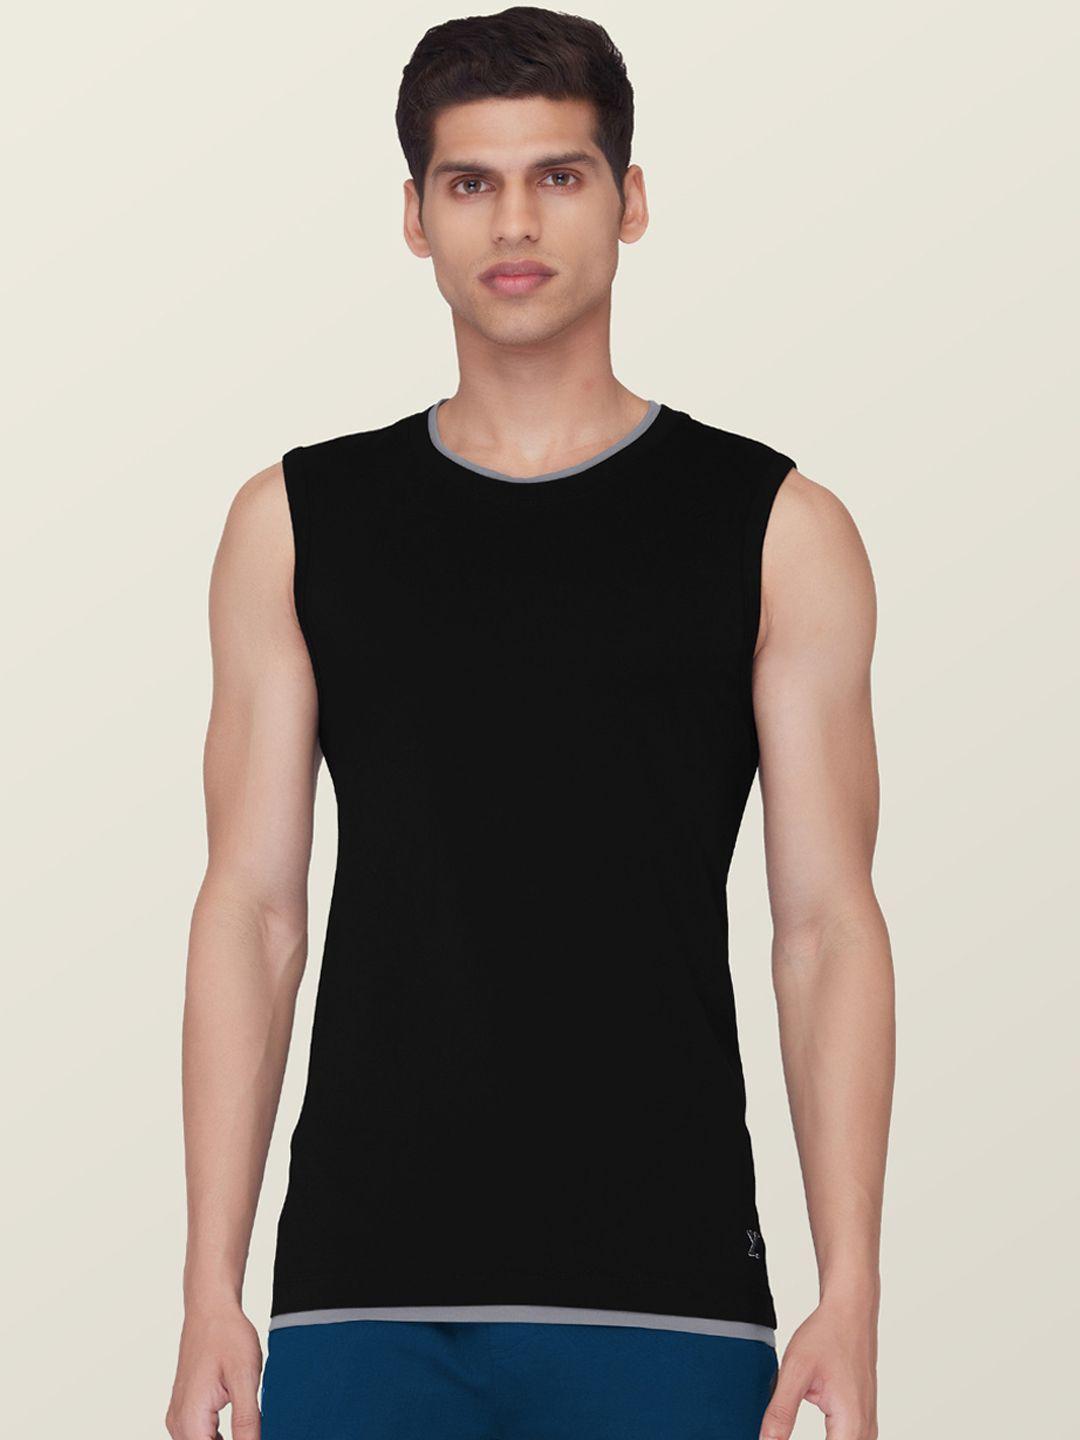 xyxx men black moisture absorbing gym vest with anti-bacterial silver finish